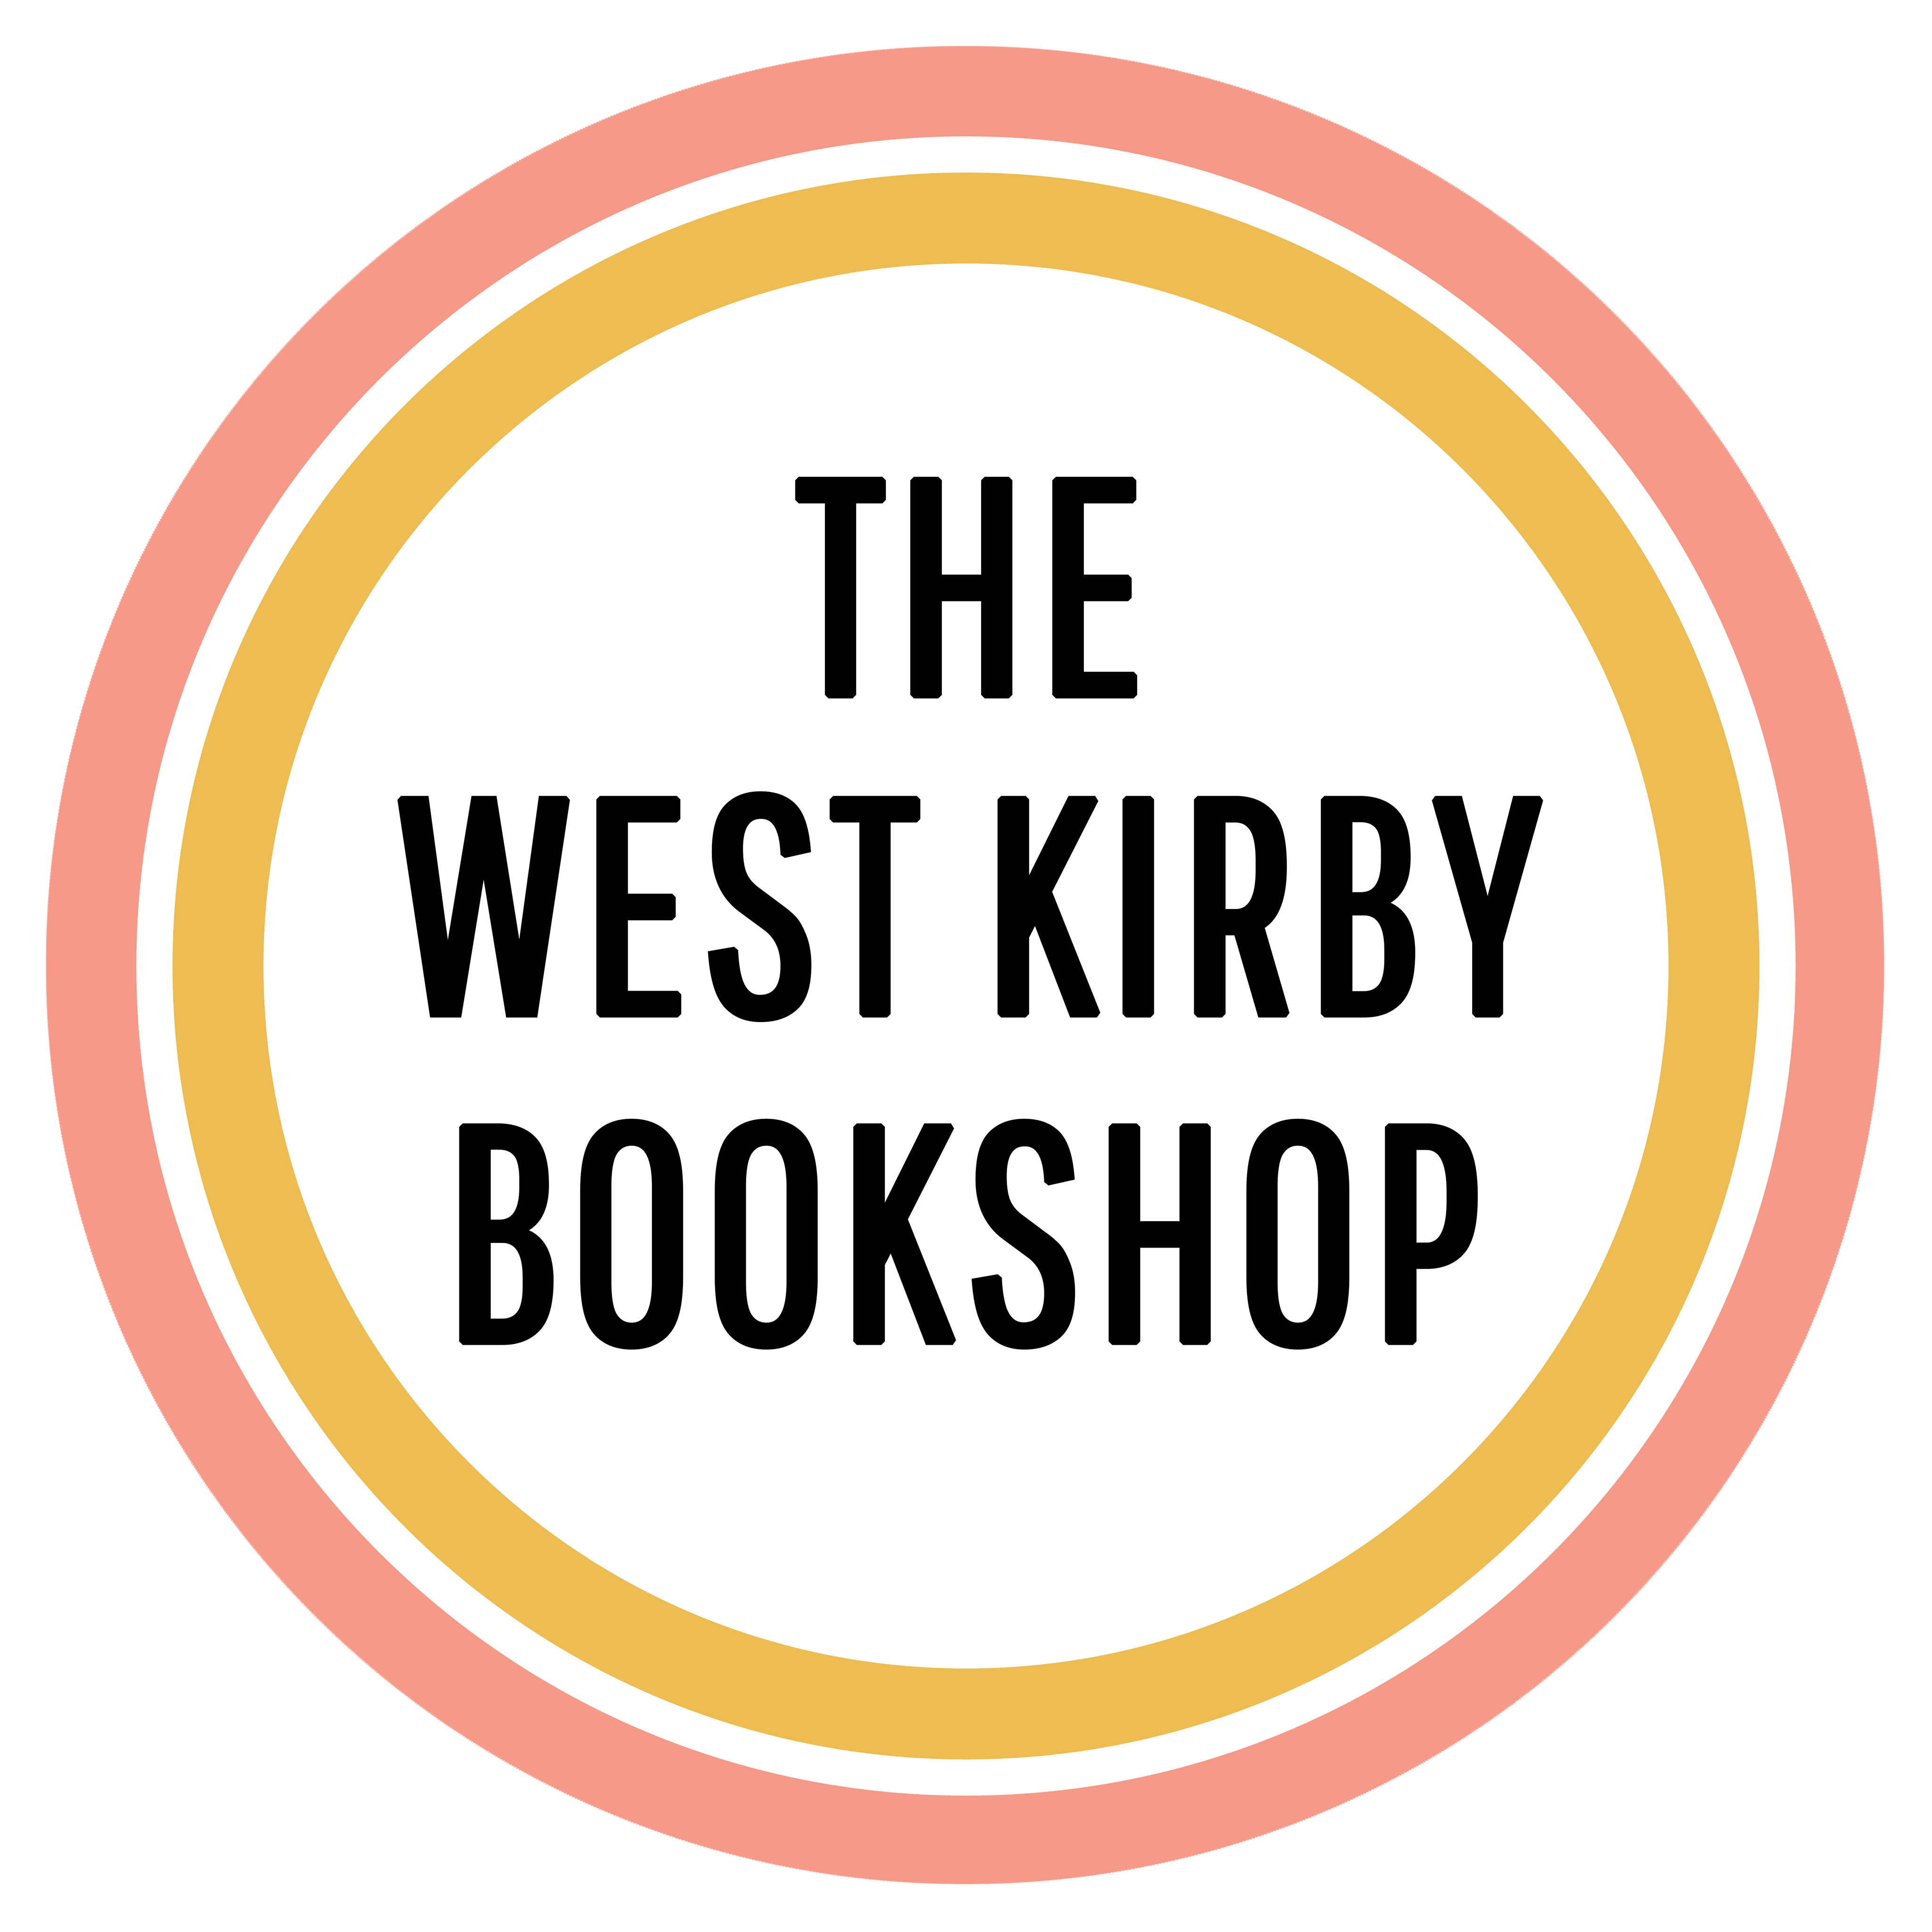 The West Kirby Bookshop’s Substack